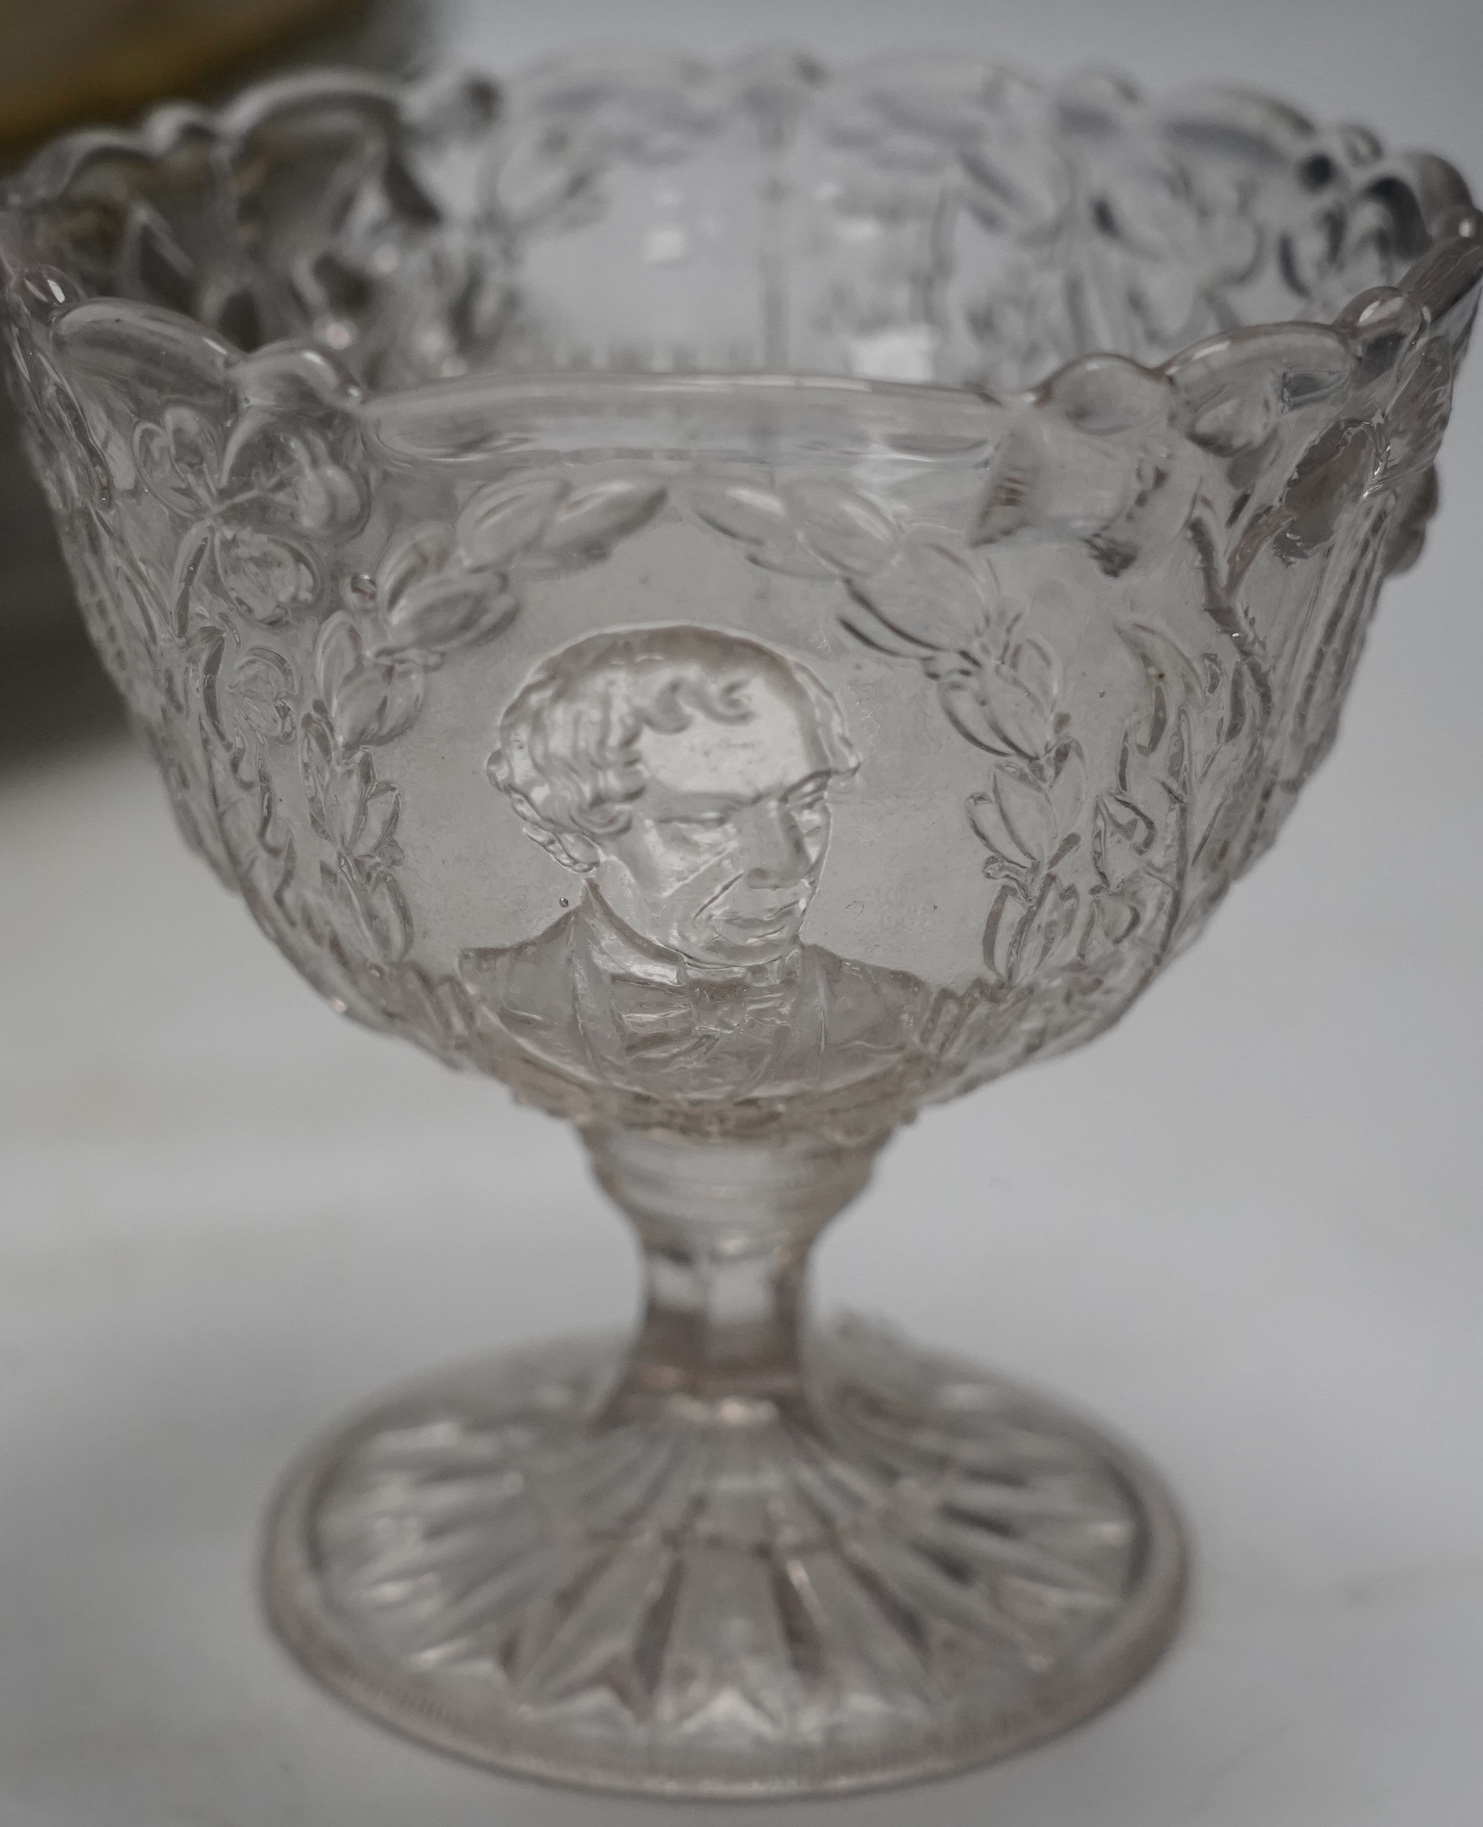 Nine pieces of Royal and other commemorative press moulded glass, Victorian to George VI, largest 30cm. Condition - good